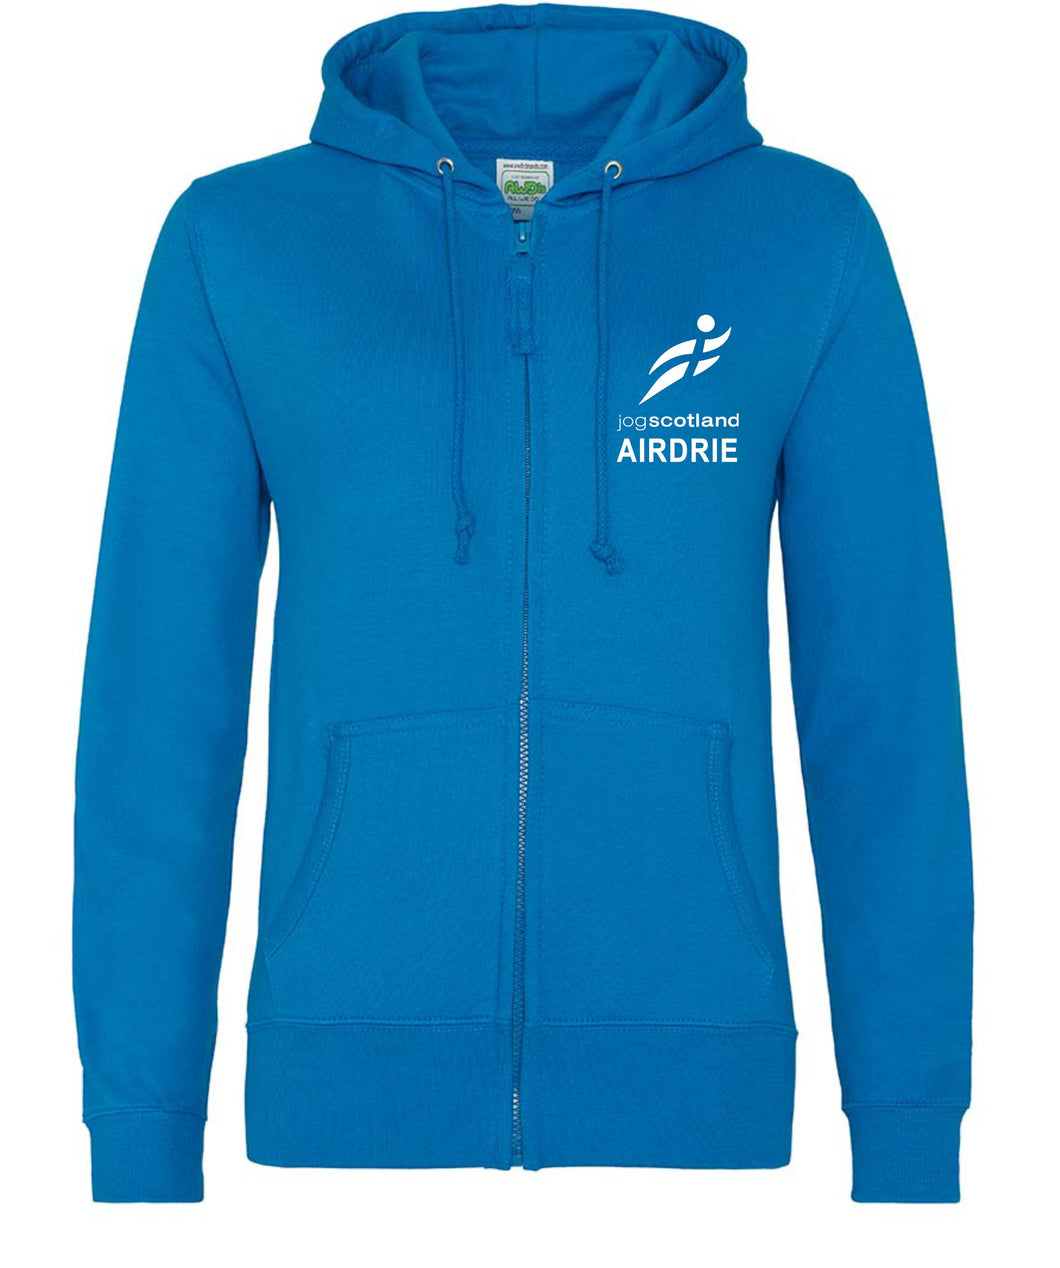 Airdrie JogScotland Zippy Hoodie JH055 FEMALE FIT